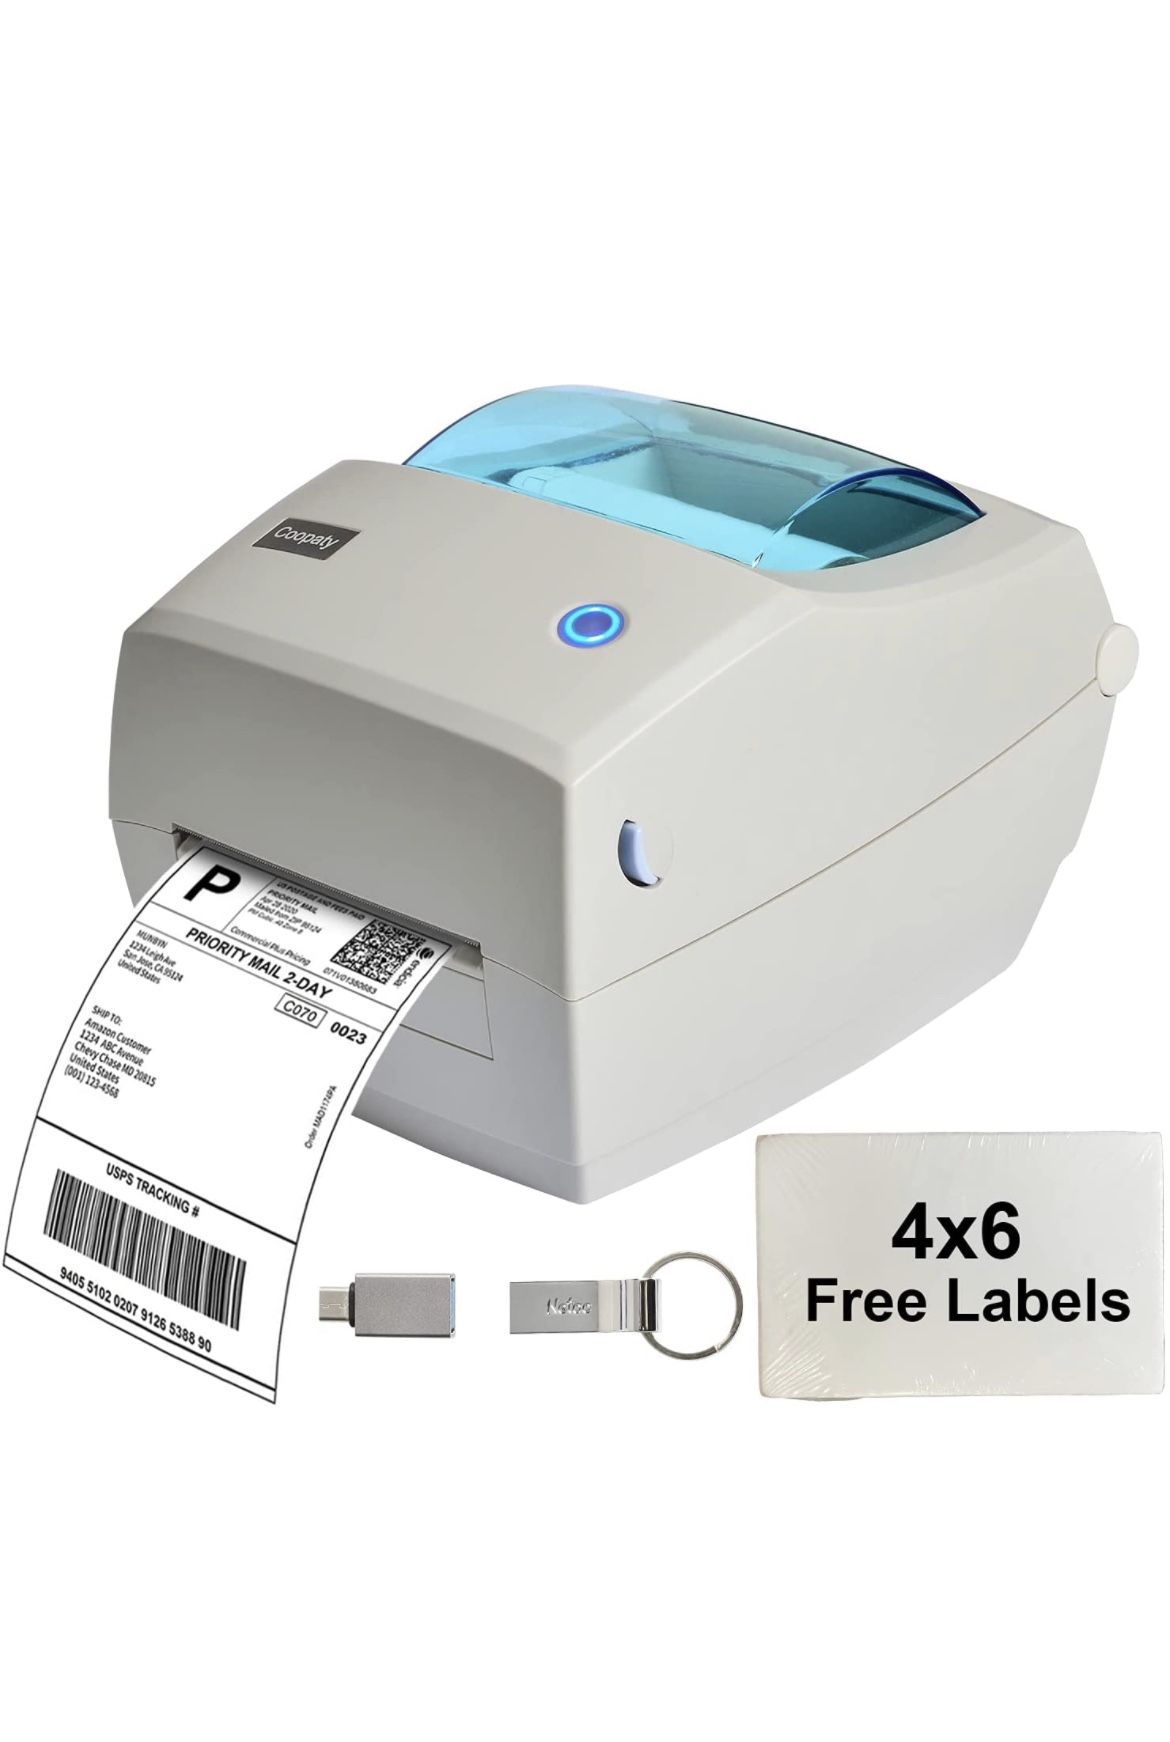 Coopaty Label Printer for Amazon, Ebay, USPS, FedEx, High-Speed 4x6 Direct Thermal Label Printer, Easy Setup on Windows/Mac with USB, Barcode Printing